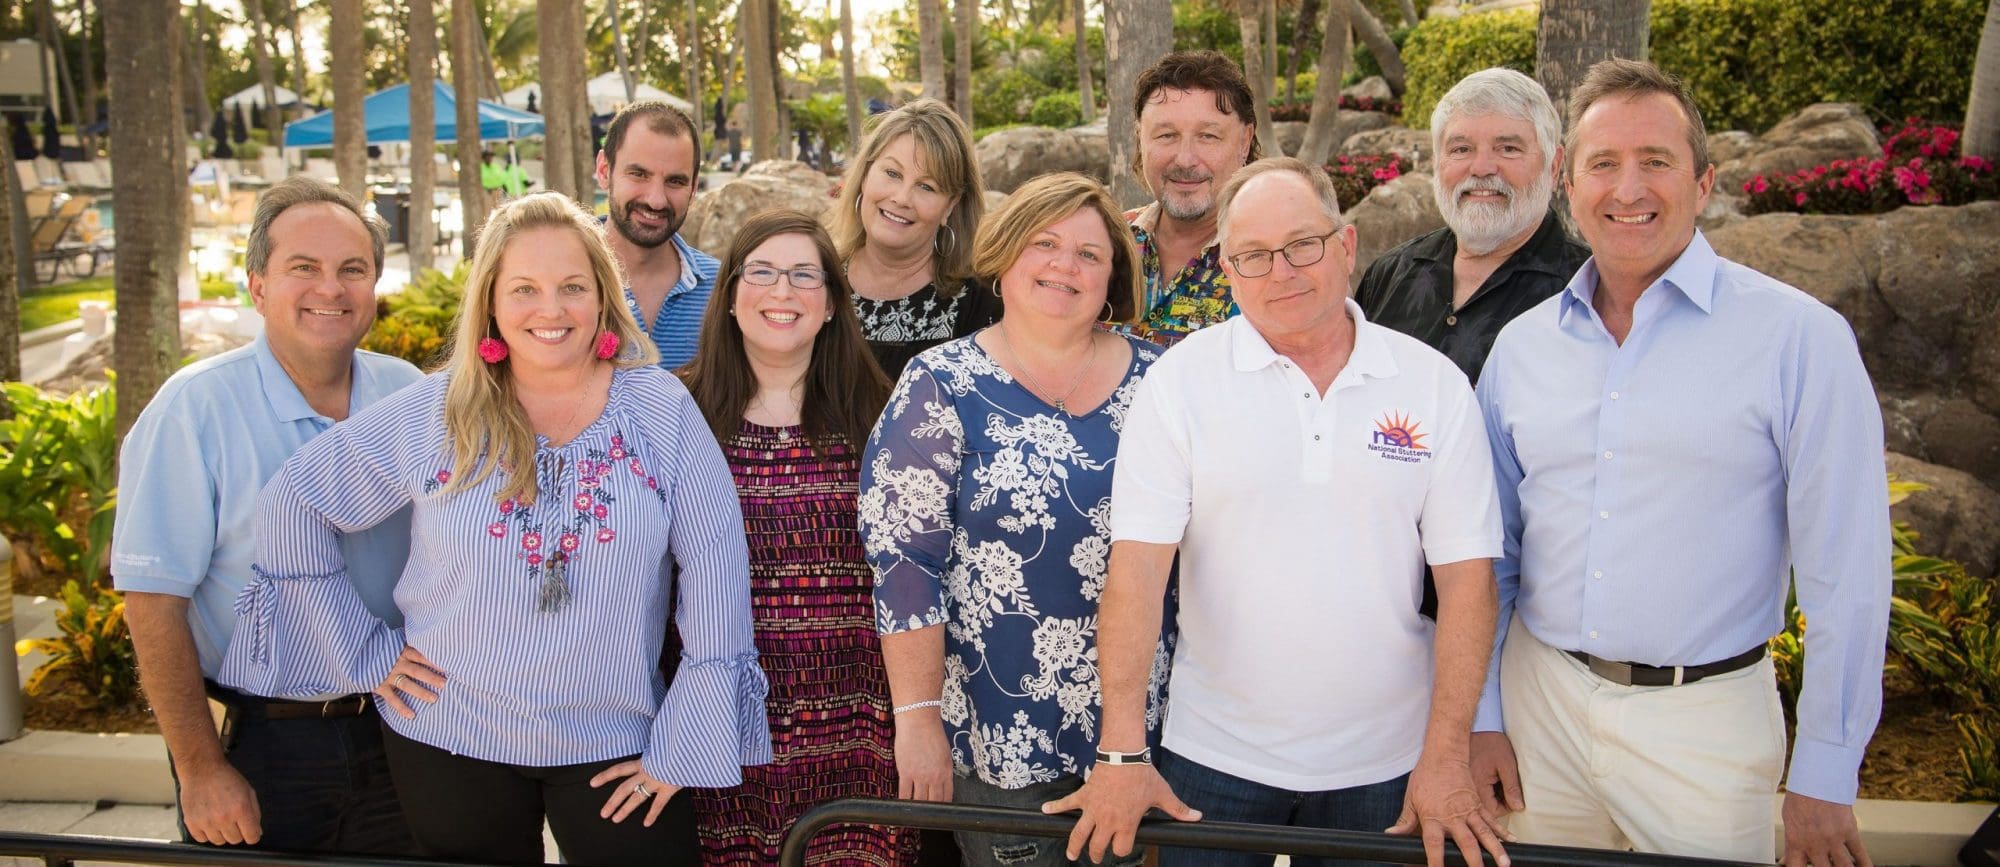 Group of ten adults smiling and posing for a photo outdoors in a sunny garden setting with palm trees in the background.